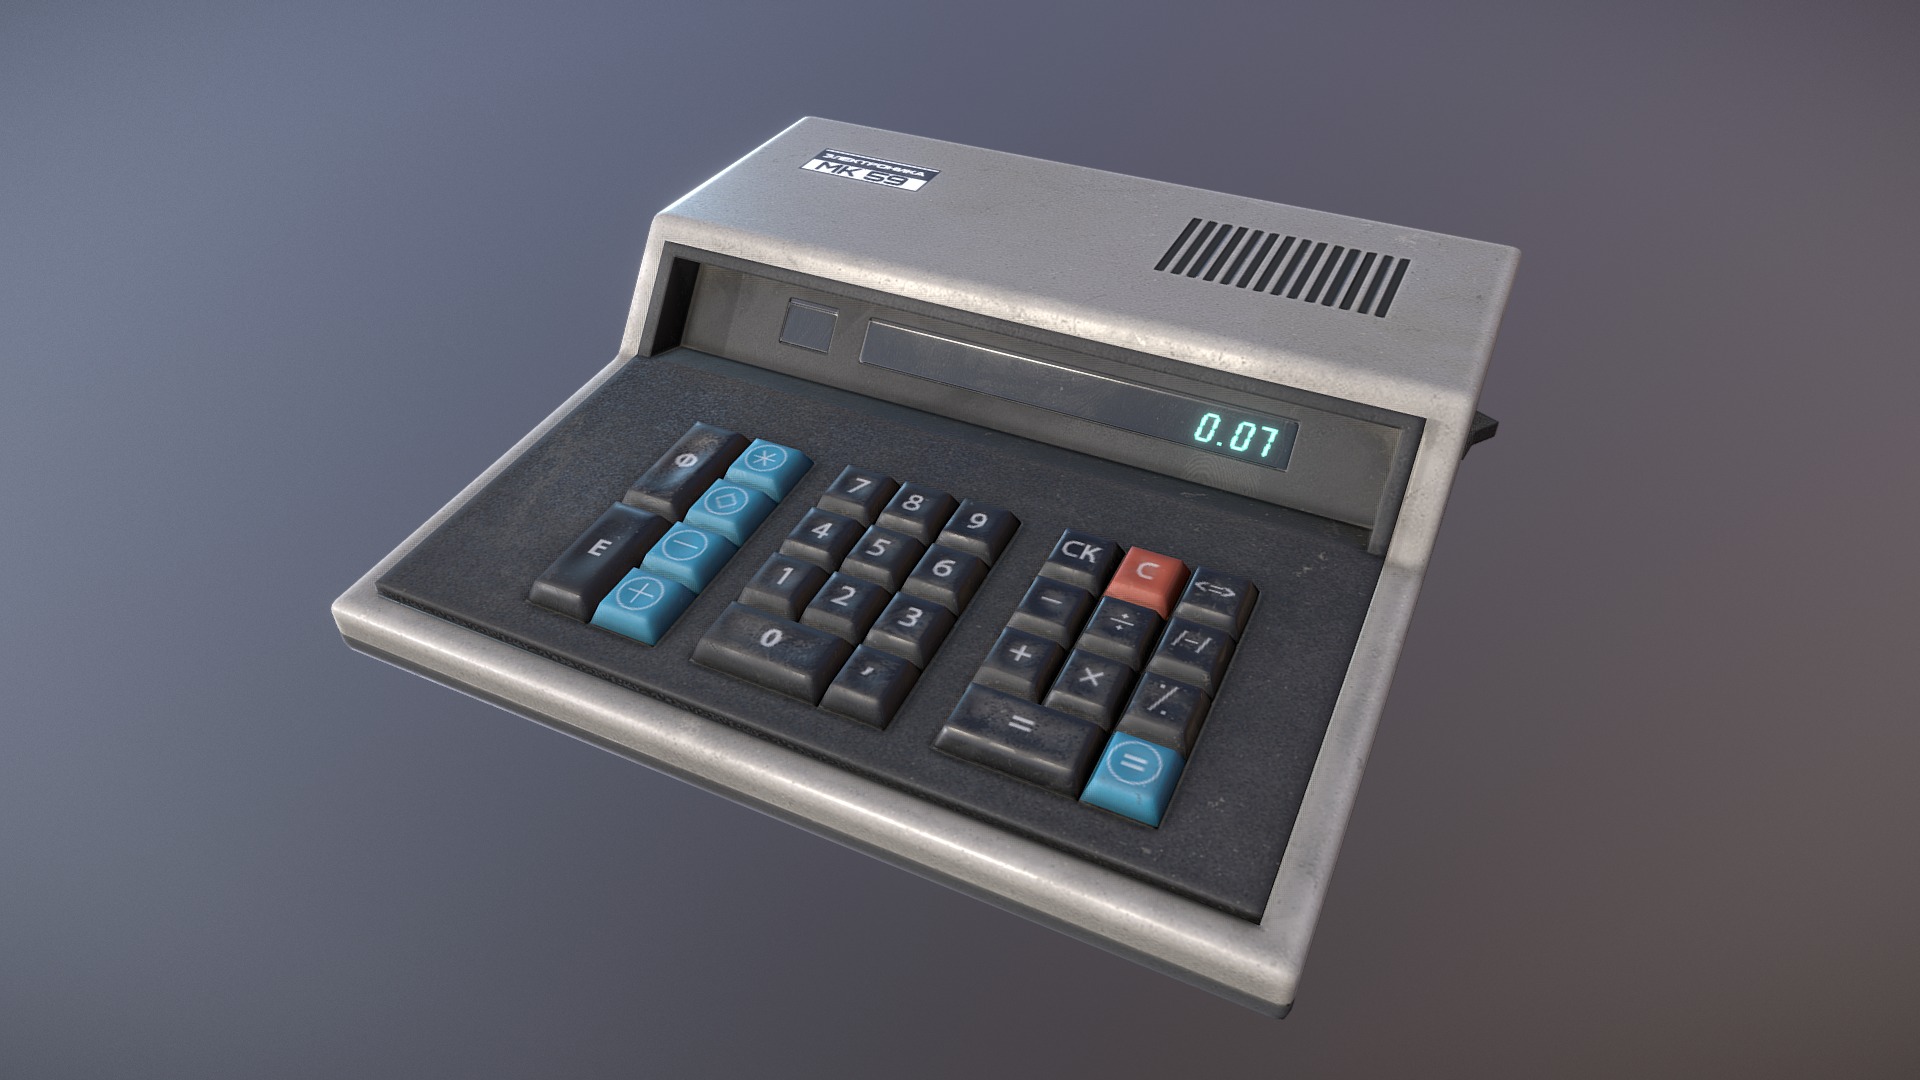 3D model Soviet Calculator – For Sale - This is a 3D model of the Soviet Calculator - For Sale. The 3D model is about a black calculator with a blue display.